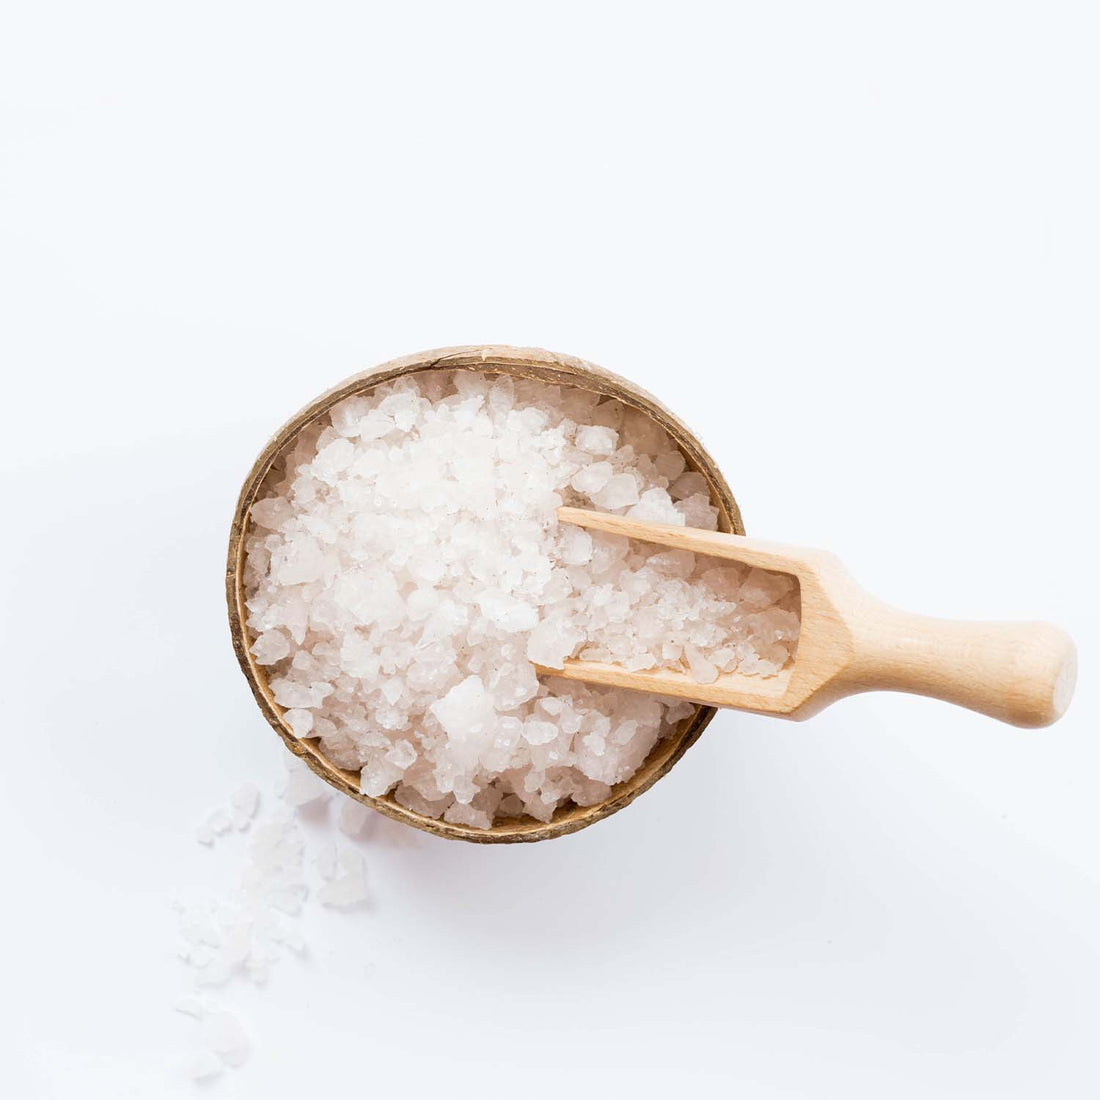 A bowl of salt with a wooden spoon on top, enhanced with Magnesium PCA for added benefits.